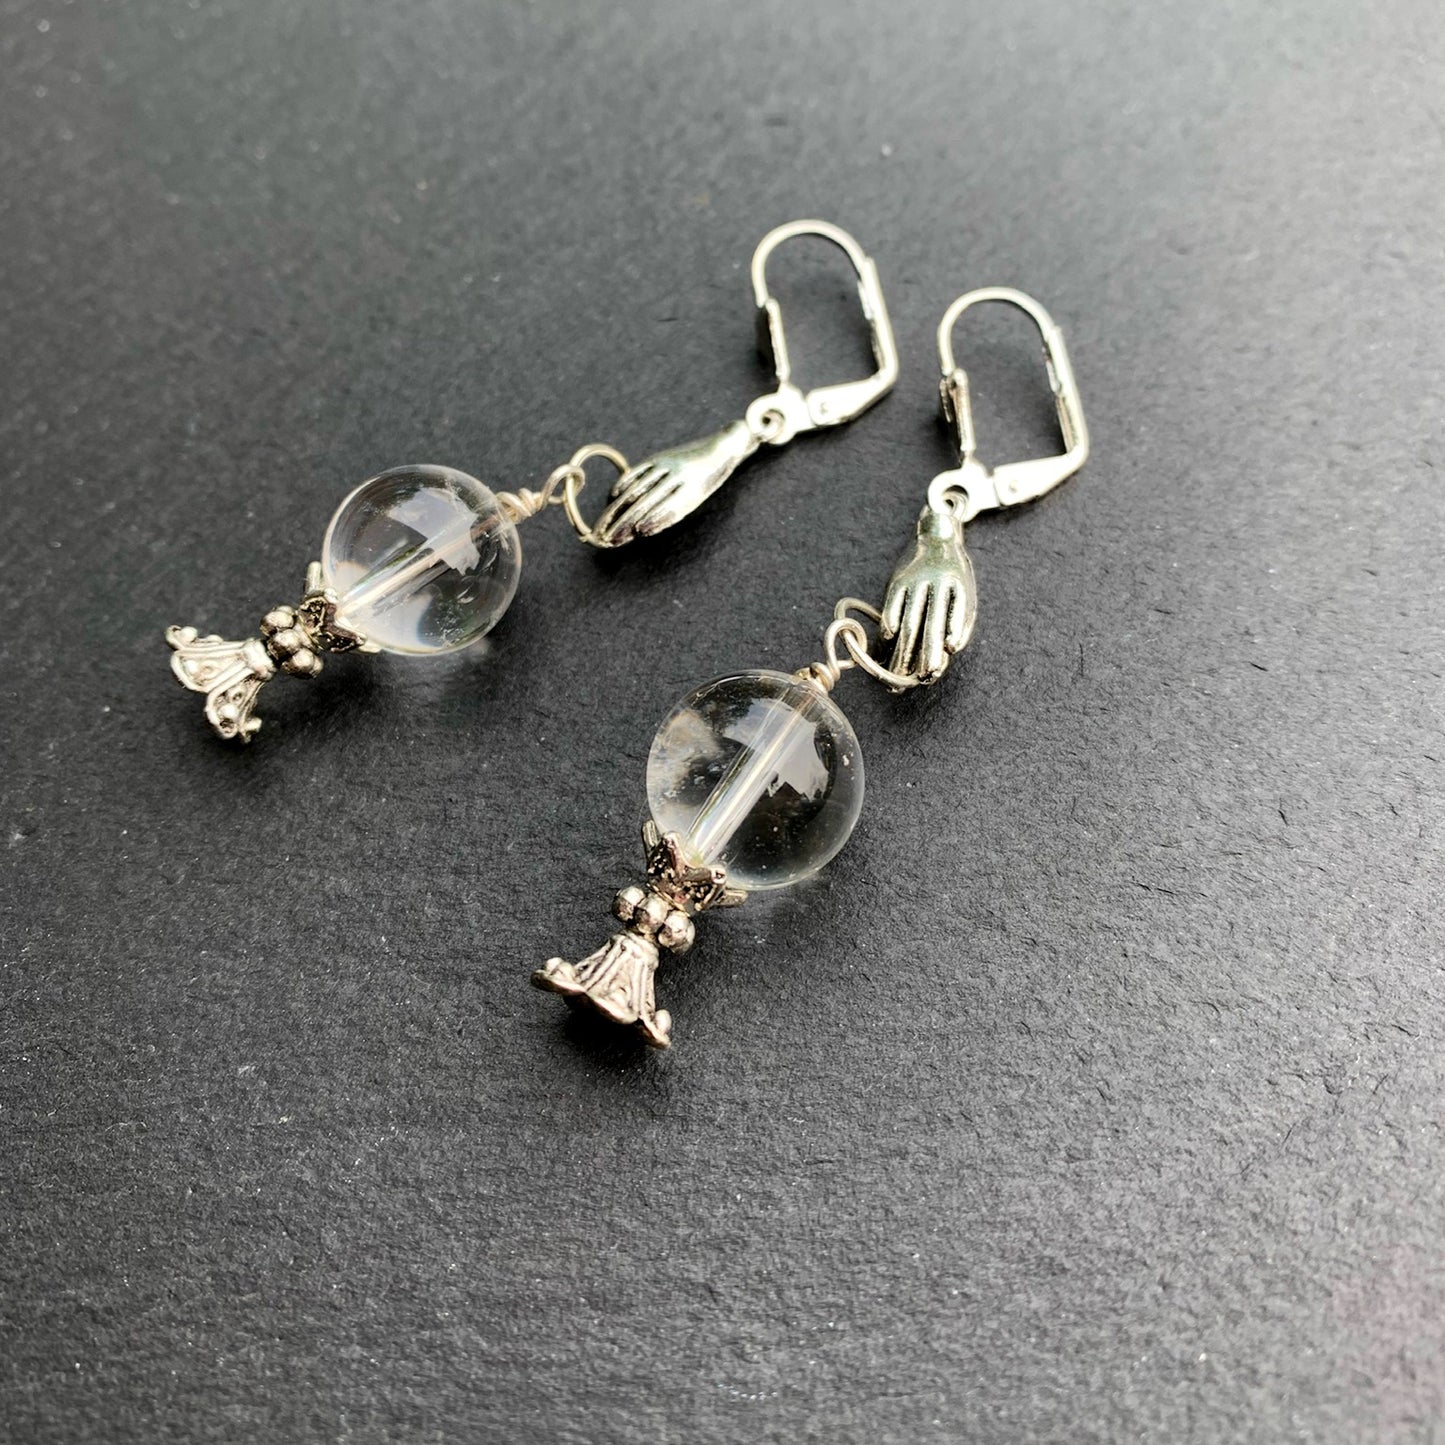 Fortune Teller Earrings With Clear Quartz Crystal Balls And Cast Pewter Hand. 925 Silver + Titanium Ear-wire Options - Darkmoon Fayre